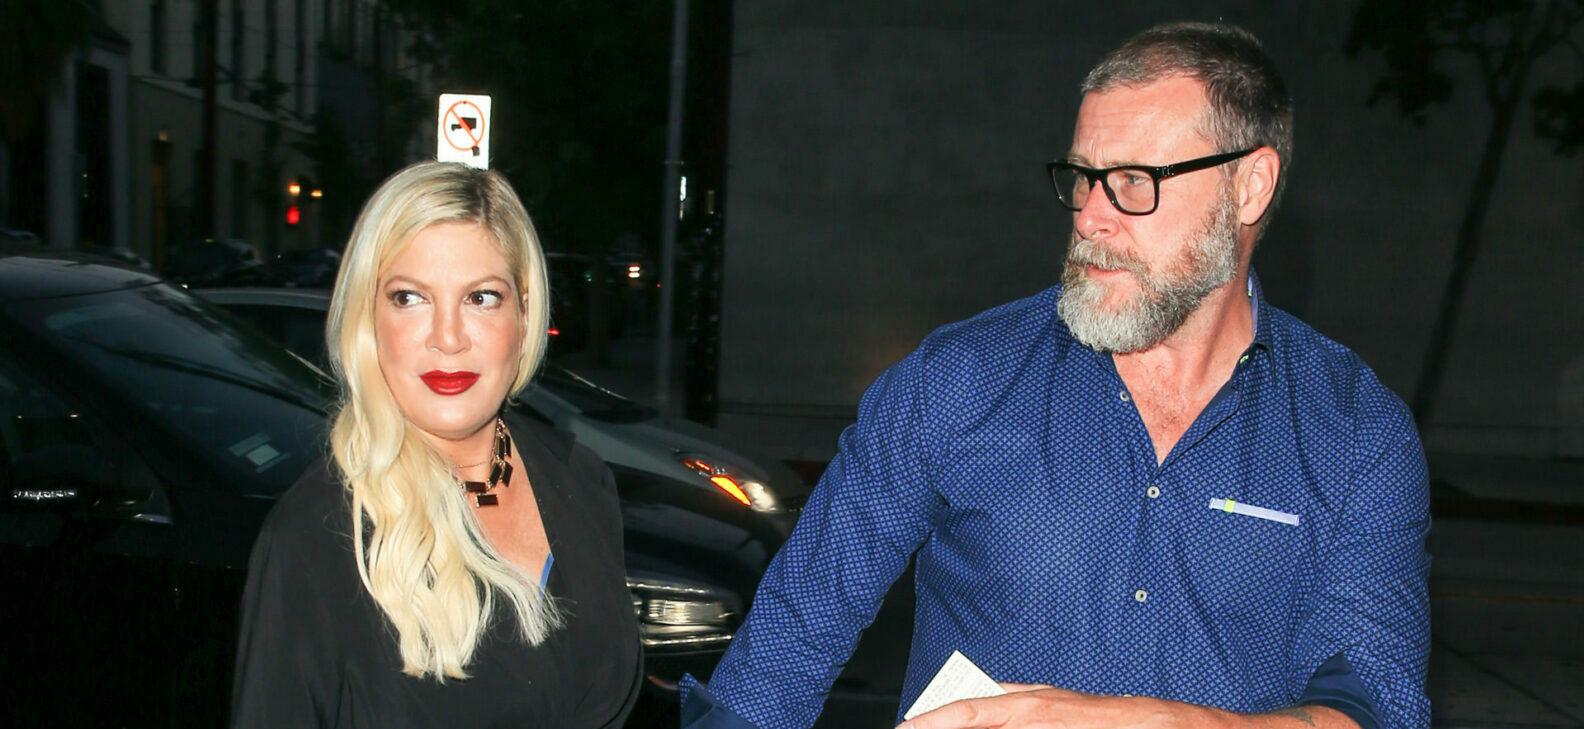 Tori Spelling Is Allegedly Staying At A $100-A-Night Motel With Her Kids Amid Dean McDermott Divorce Rumors